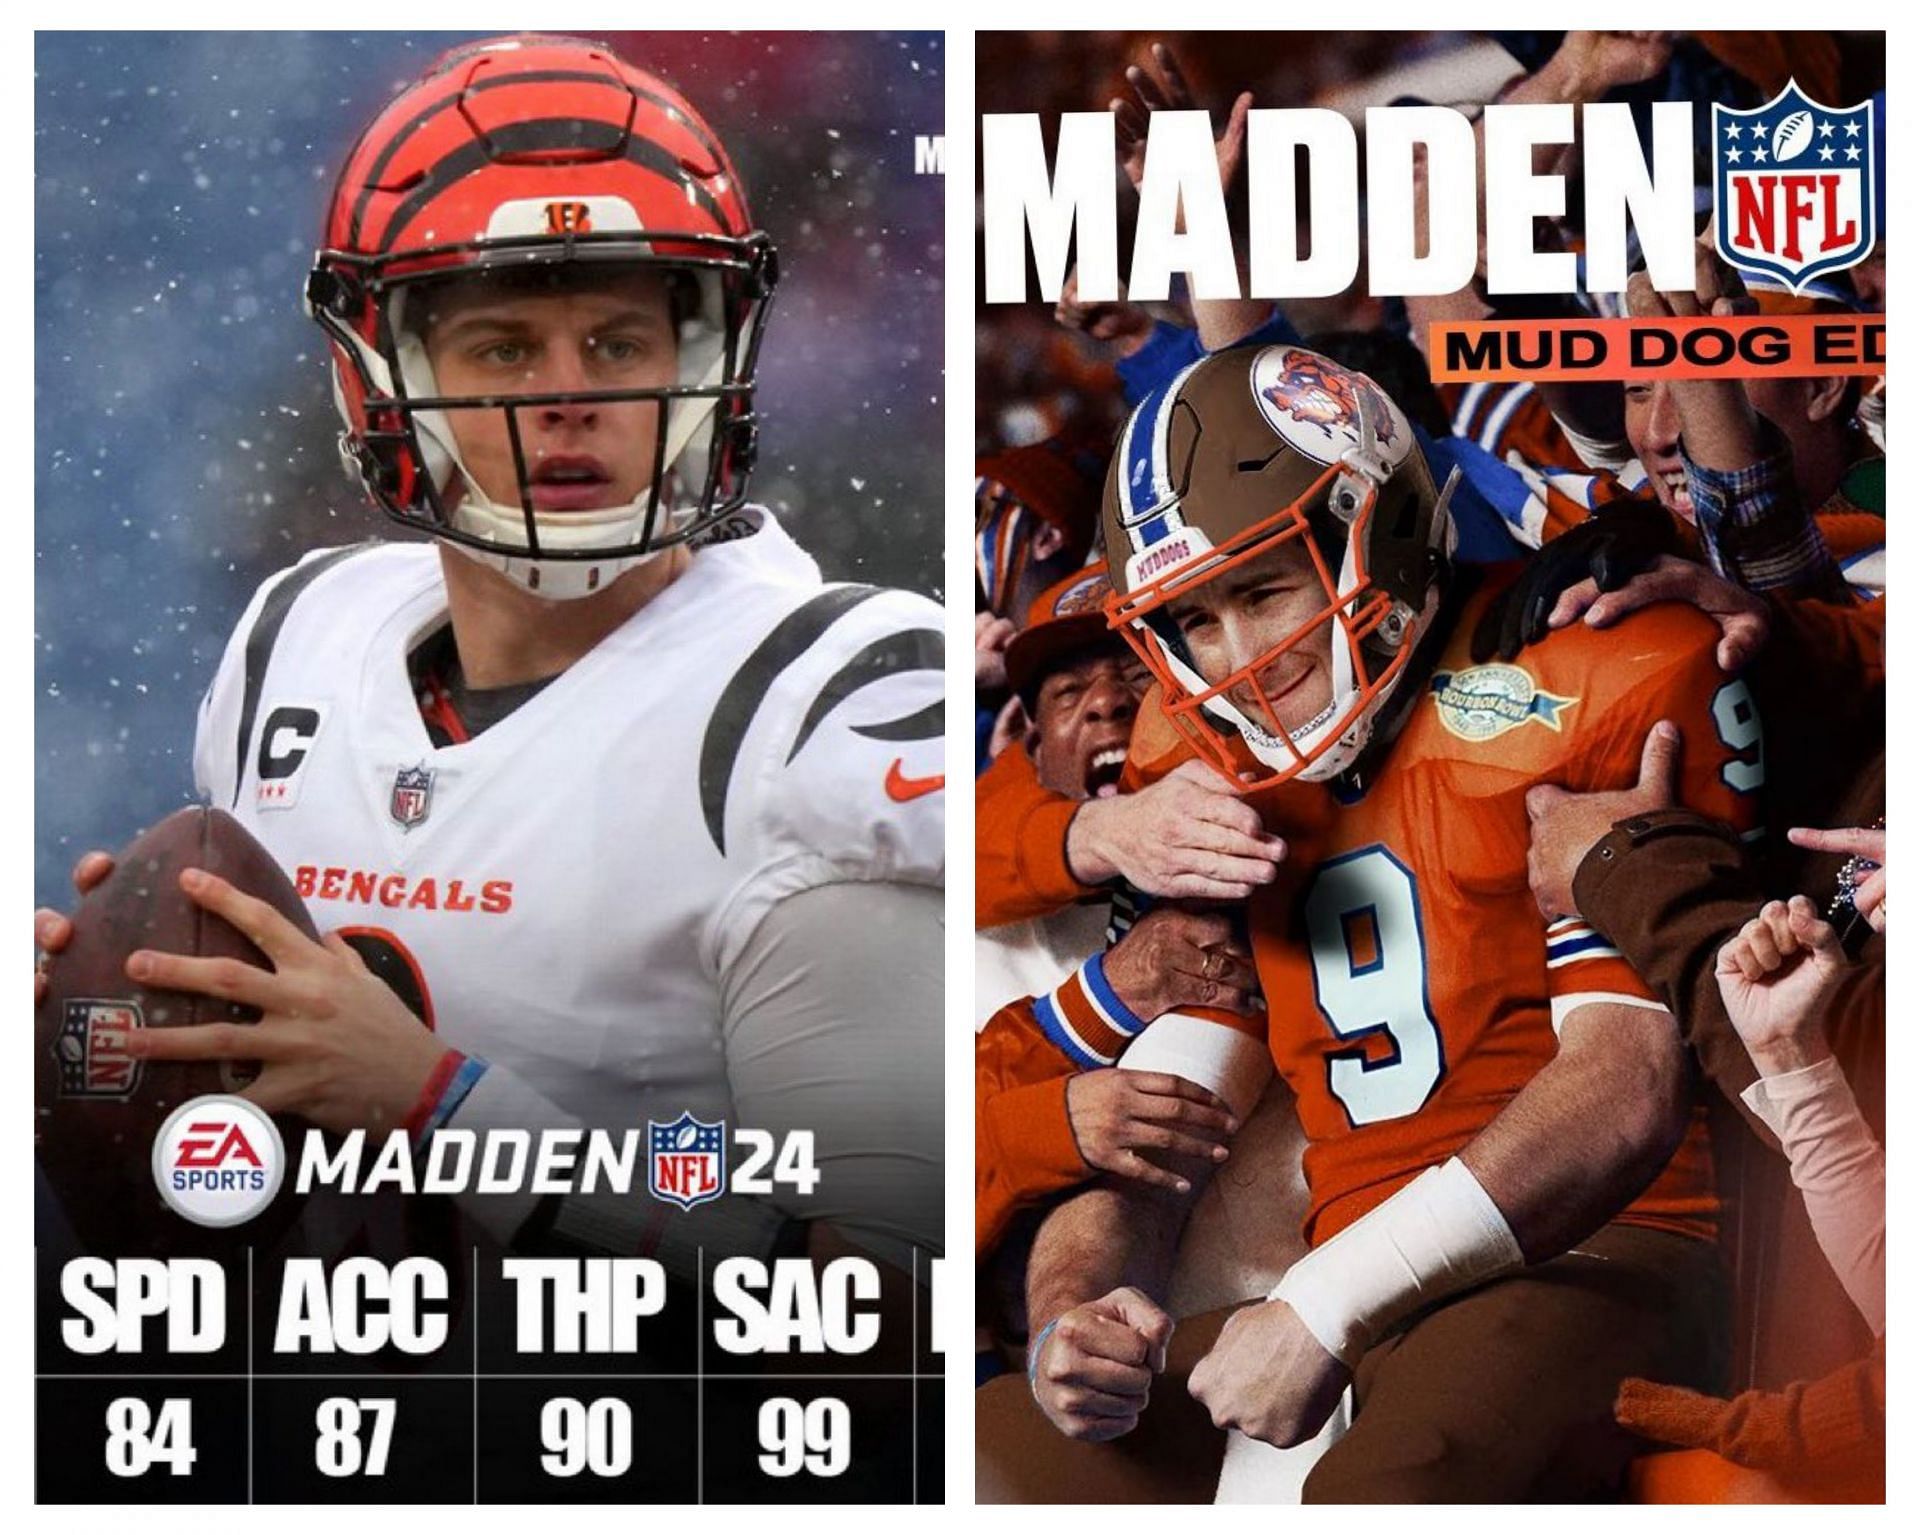 Did you catch the mistake on the Madden 24 cover?